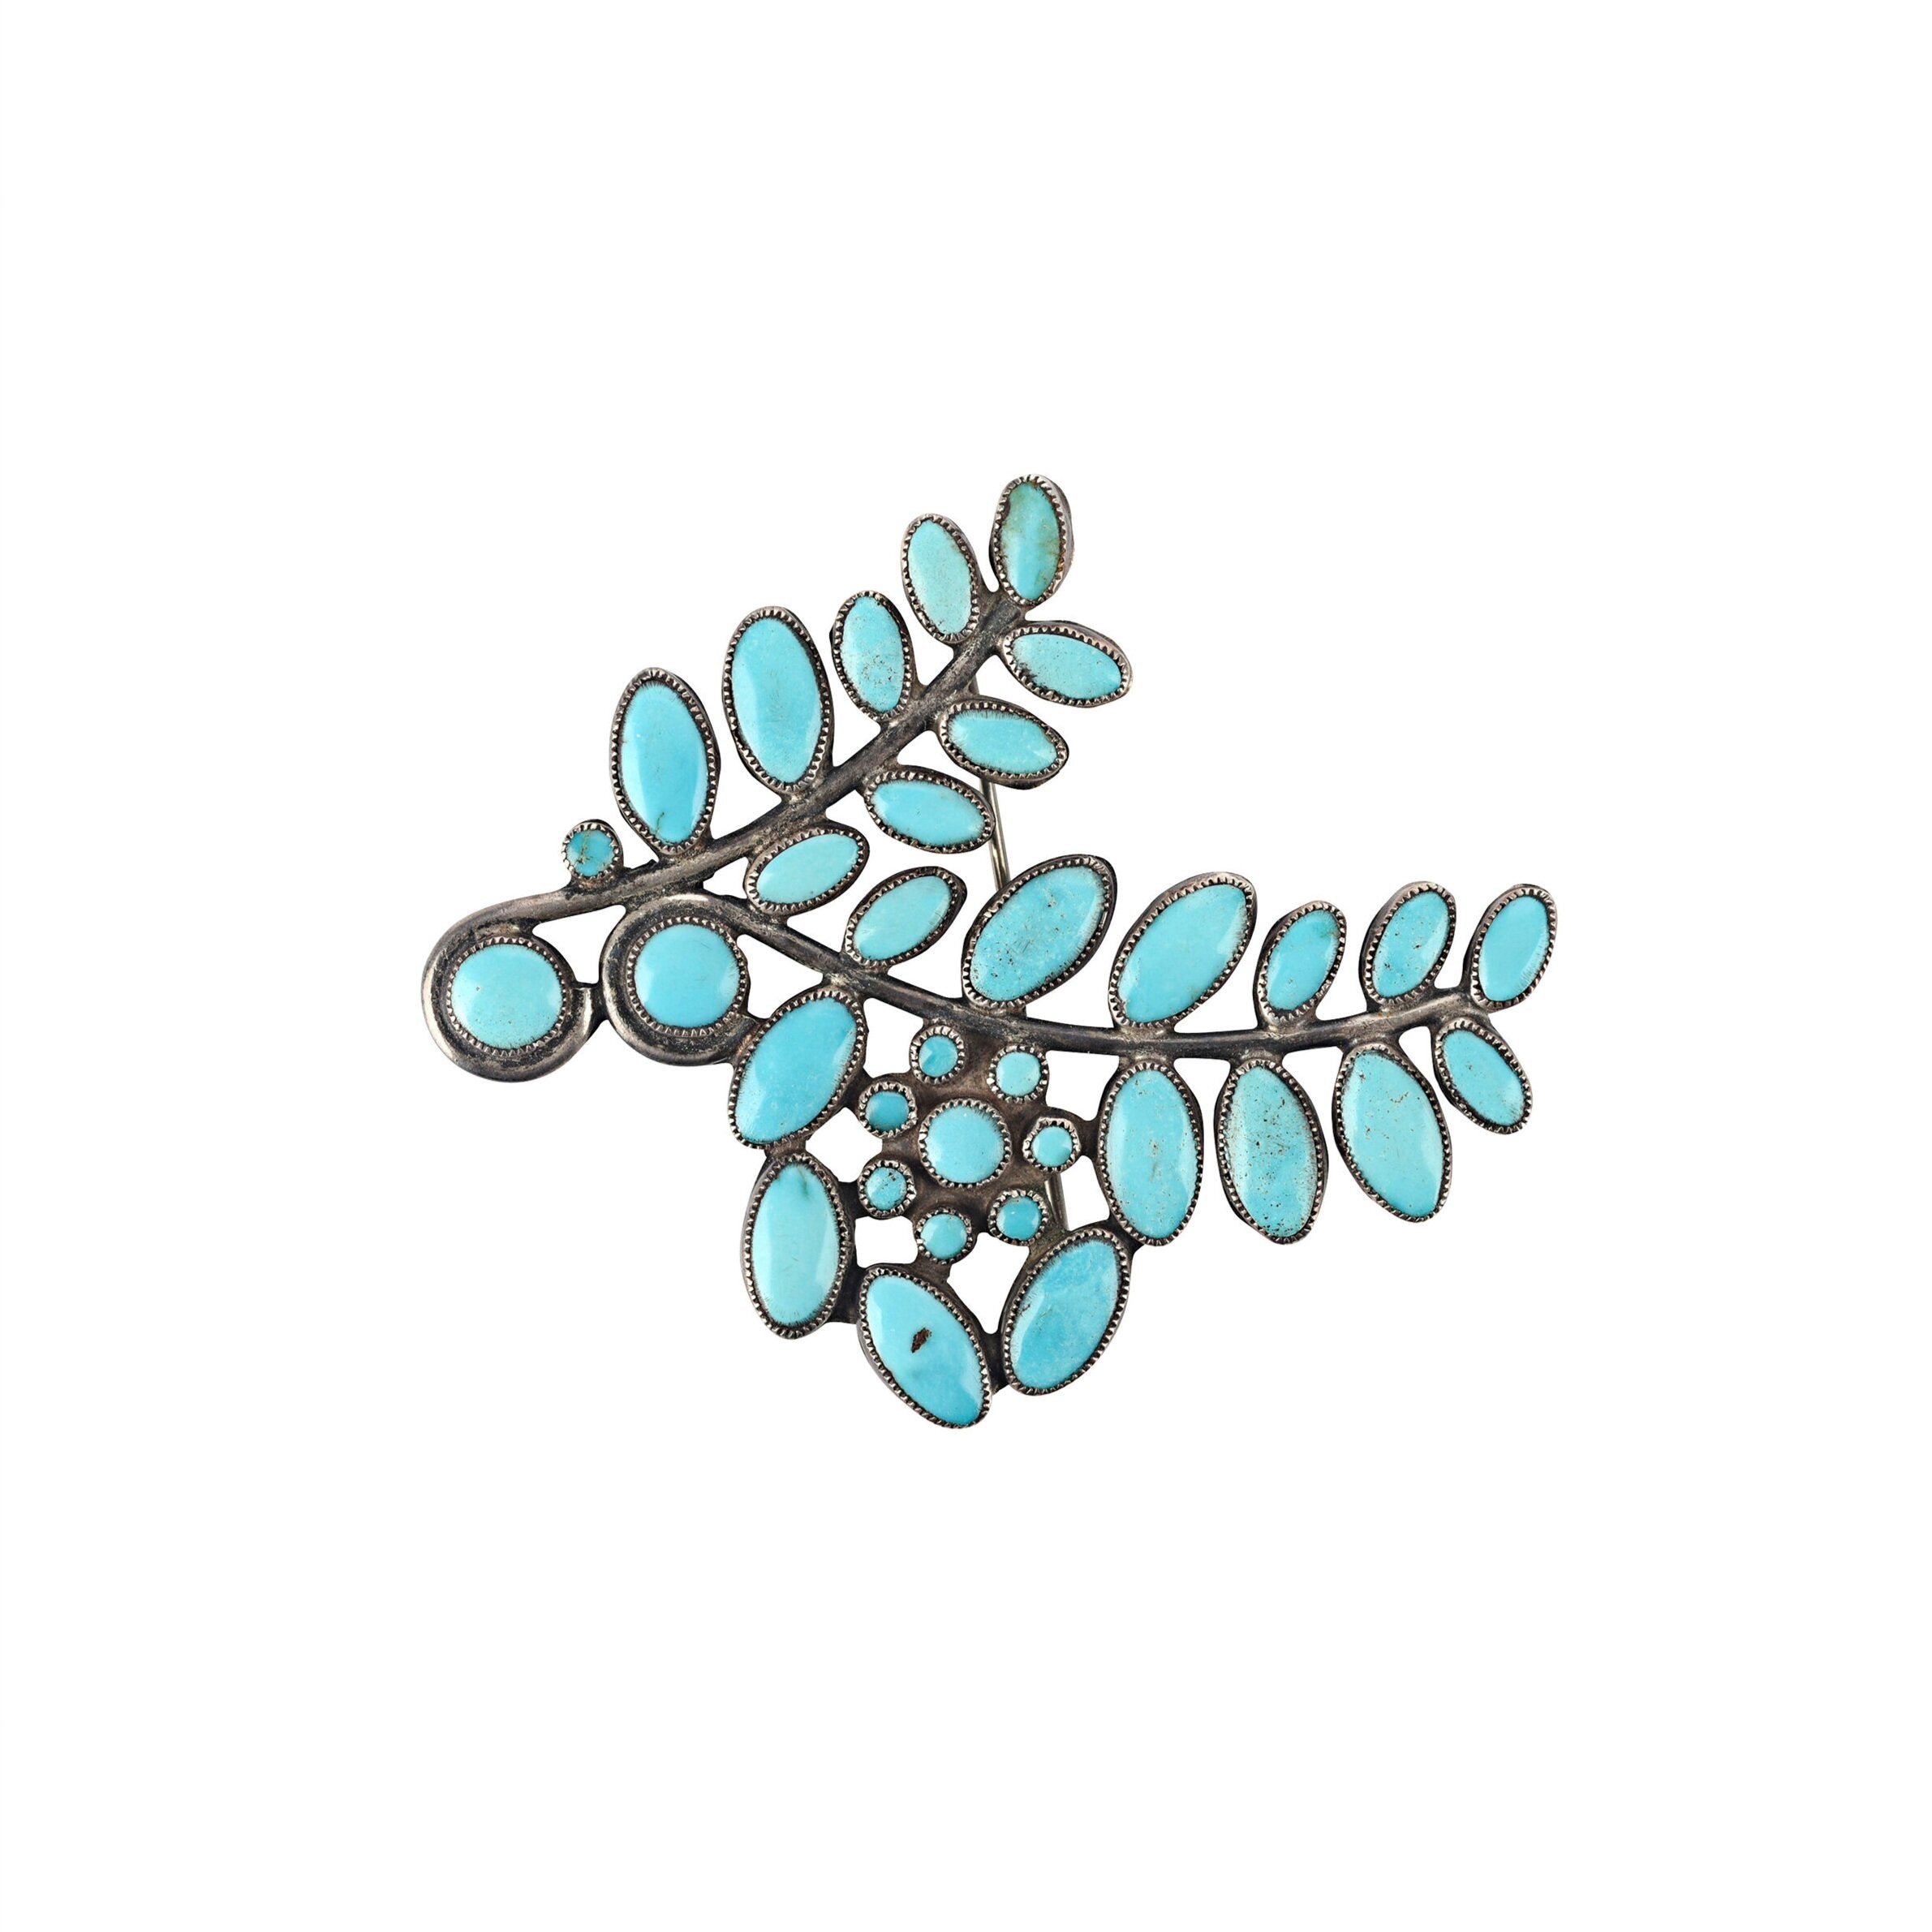 Vintage Zuni Turquoise Leaf and Flower Pin, c. 1950's